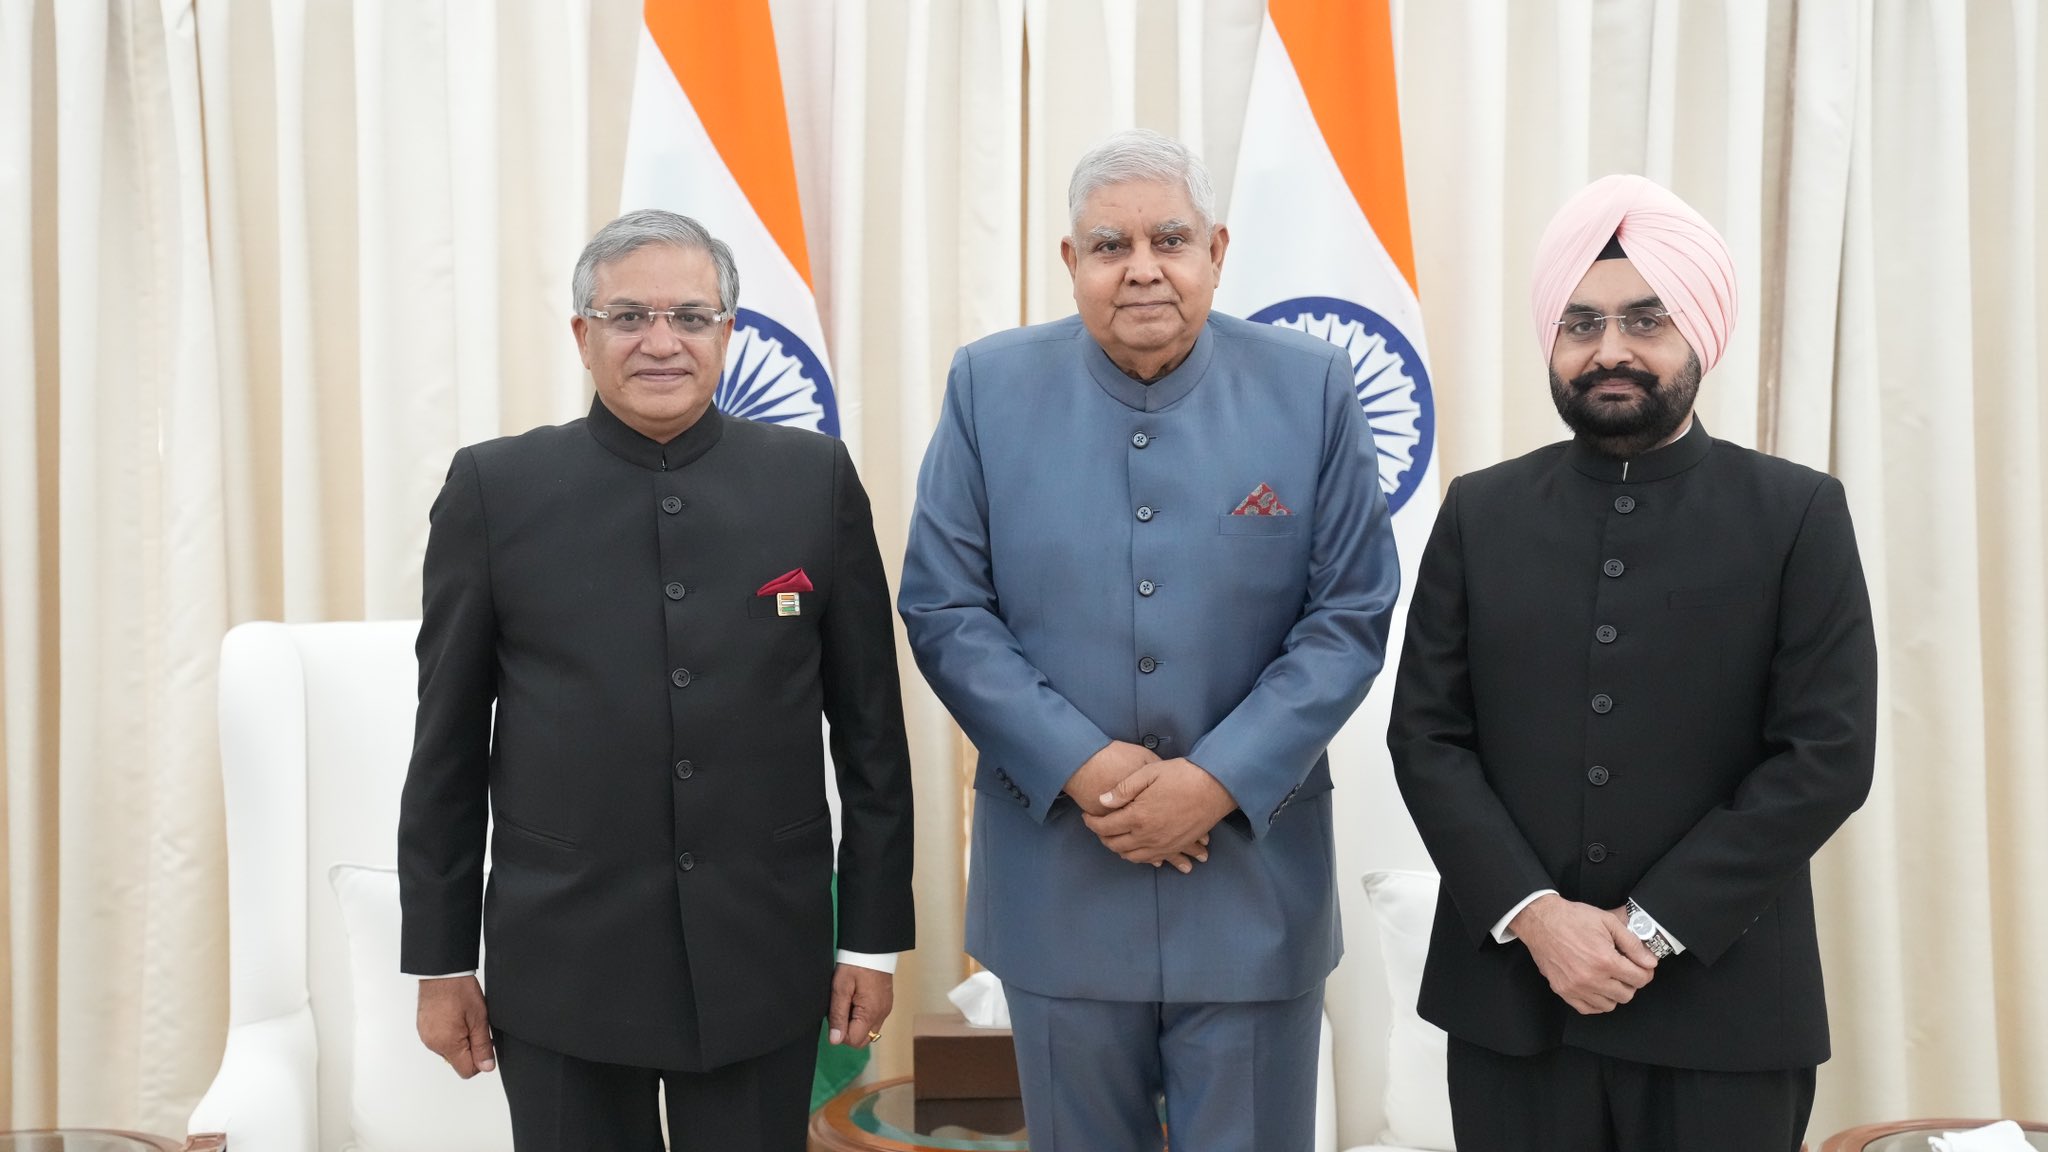 Election Commissioners Gyanesh Kumar and Dr. Sukhbir Singh Sandhu met with Vice-President of India Shri Jagdeep Dhankhar after their appointment